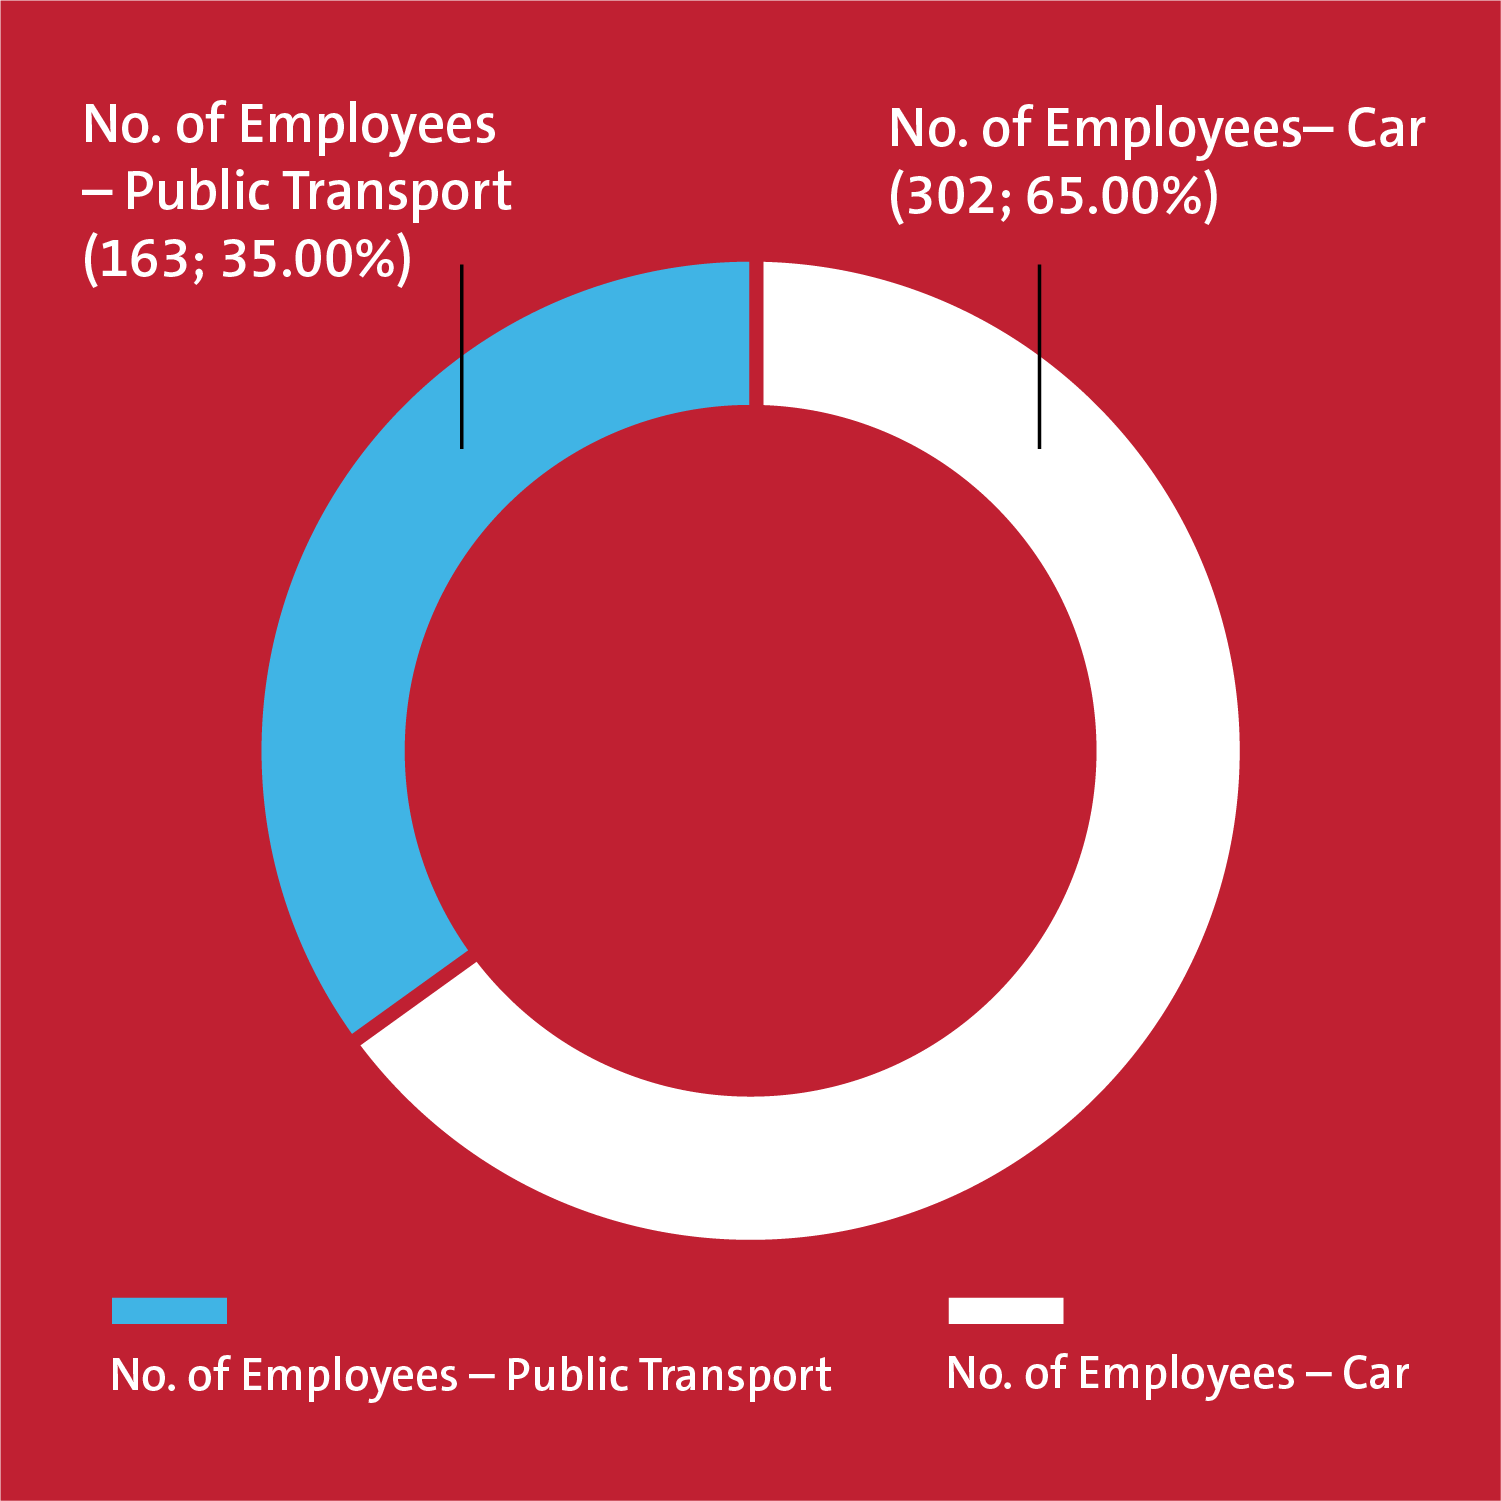 35% of employees came by public transport, 65% came by car